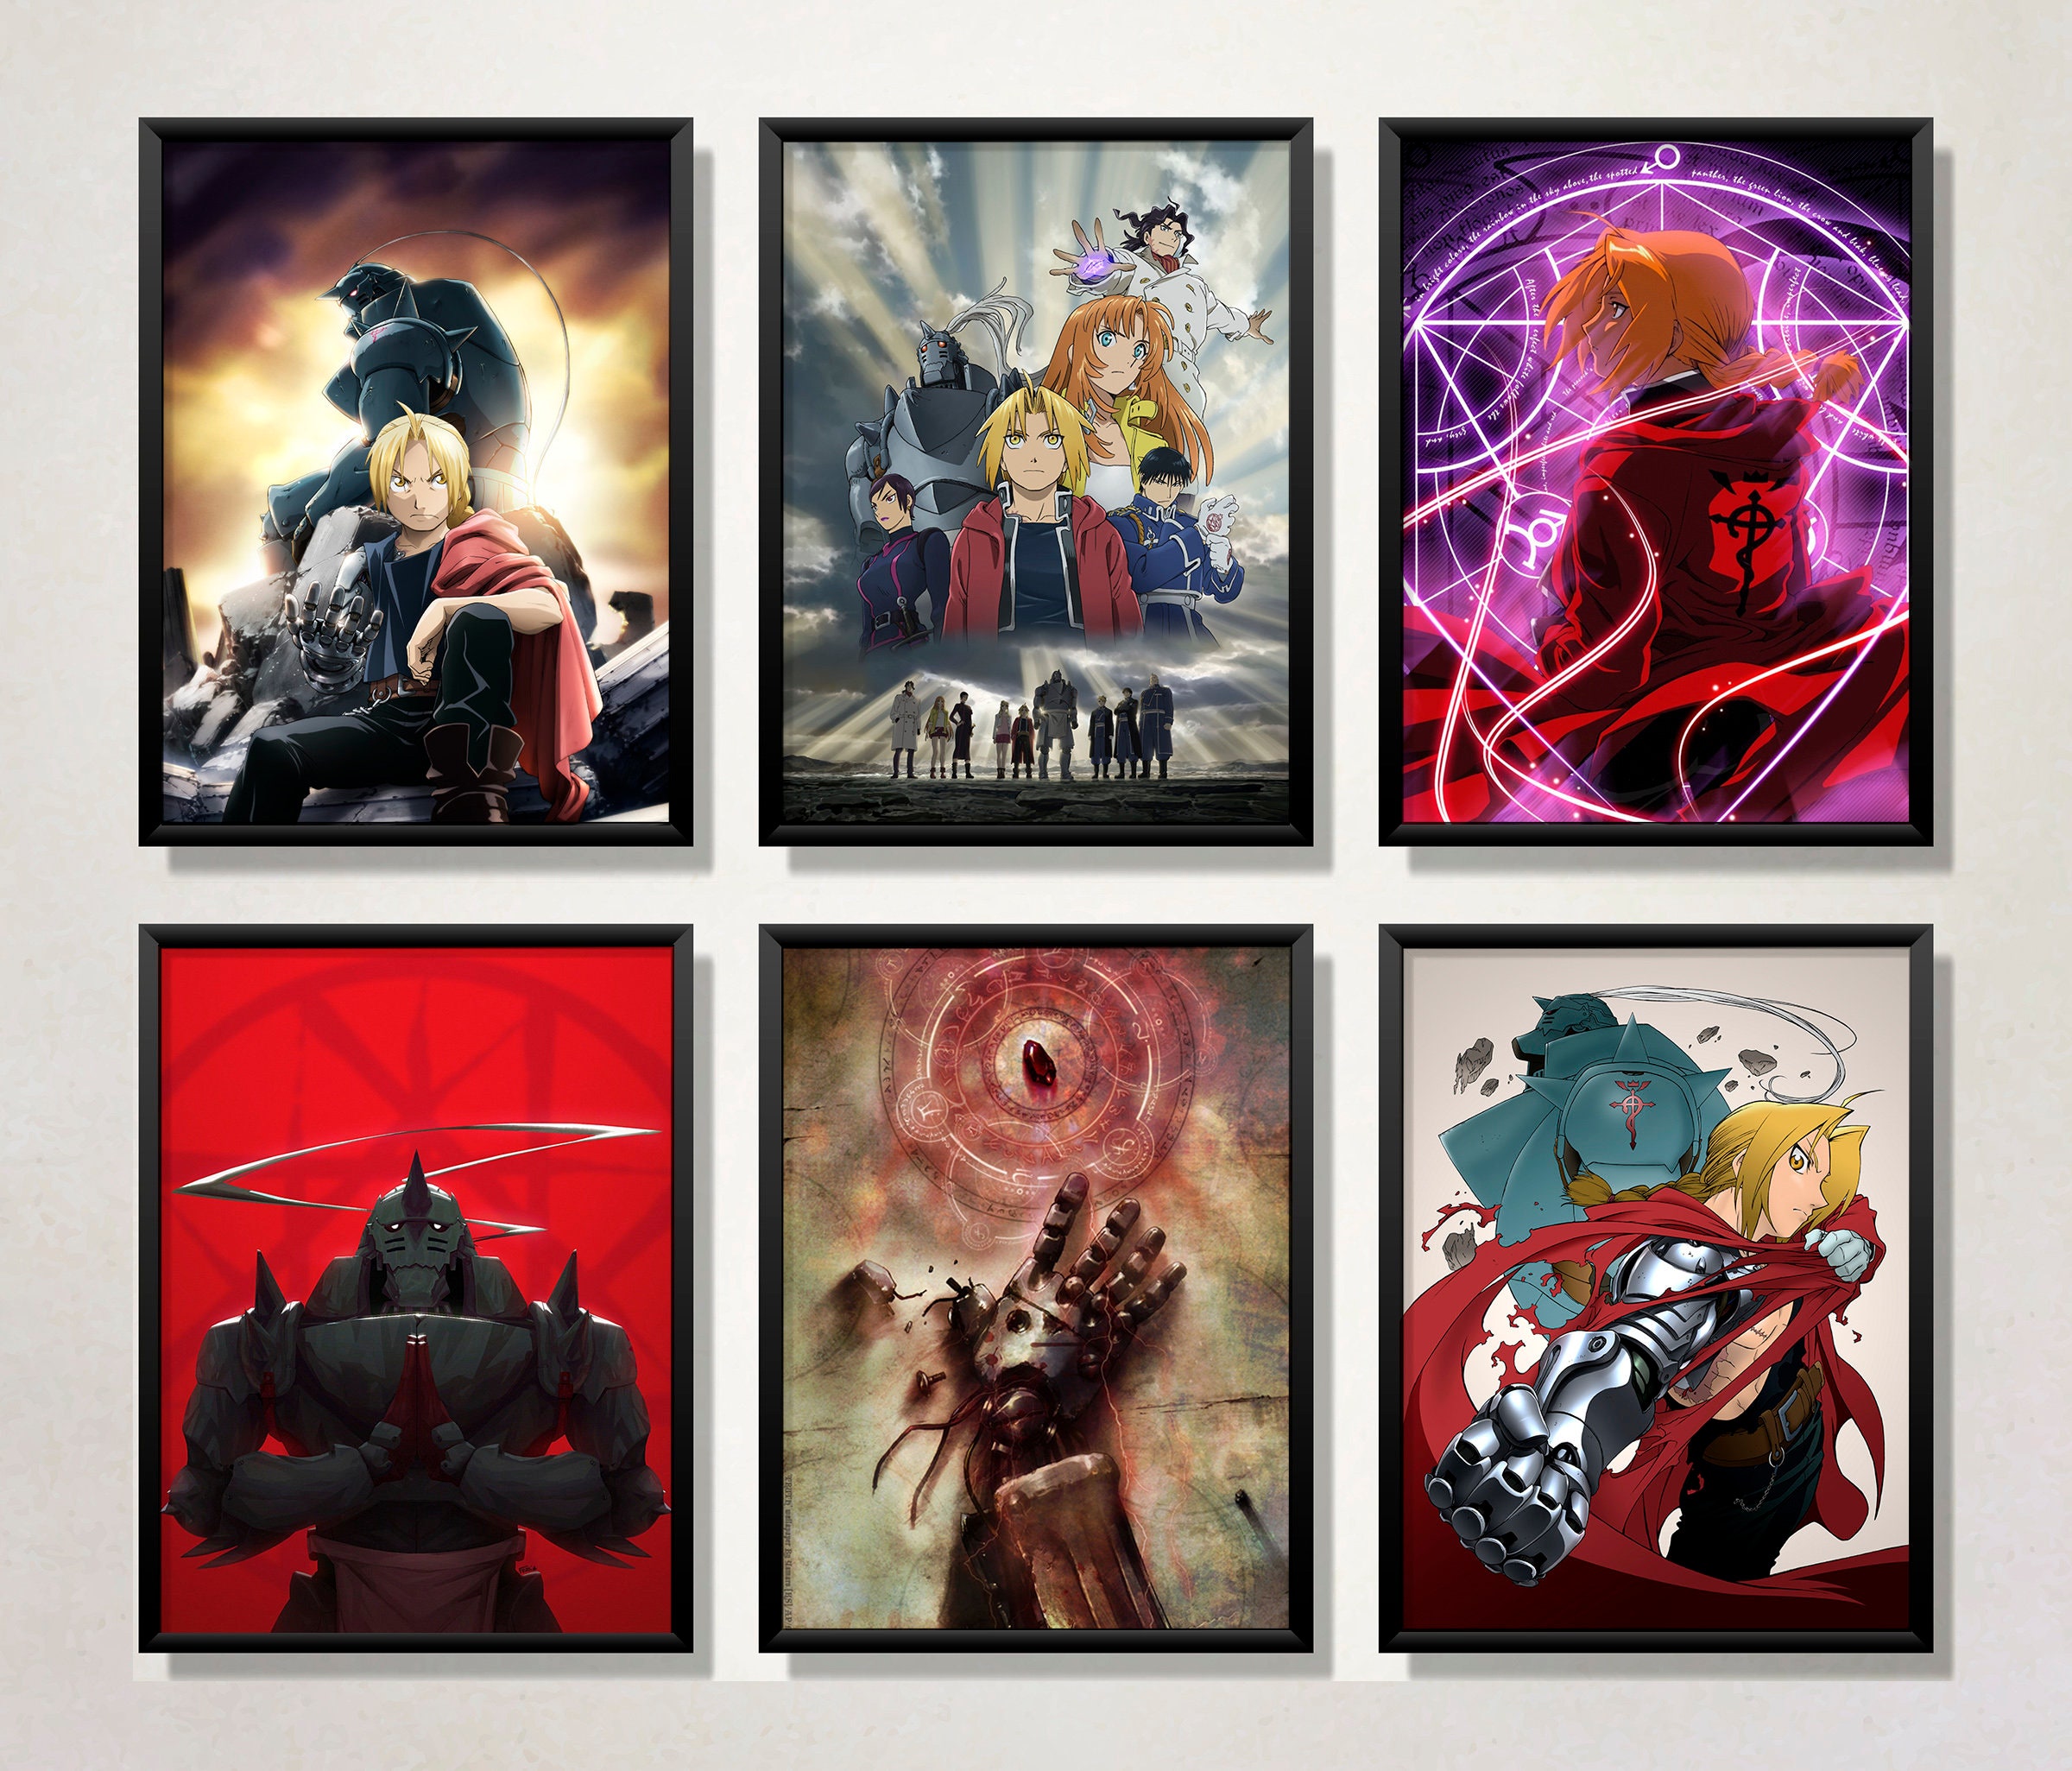 ZKFG Fullmetal Alchemist Brotherhood Anime Classic Poster Poster Decorative  Painting Canvas Wall Art Living Room Posters Bedroom Painting